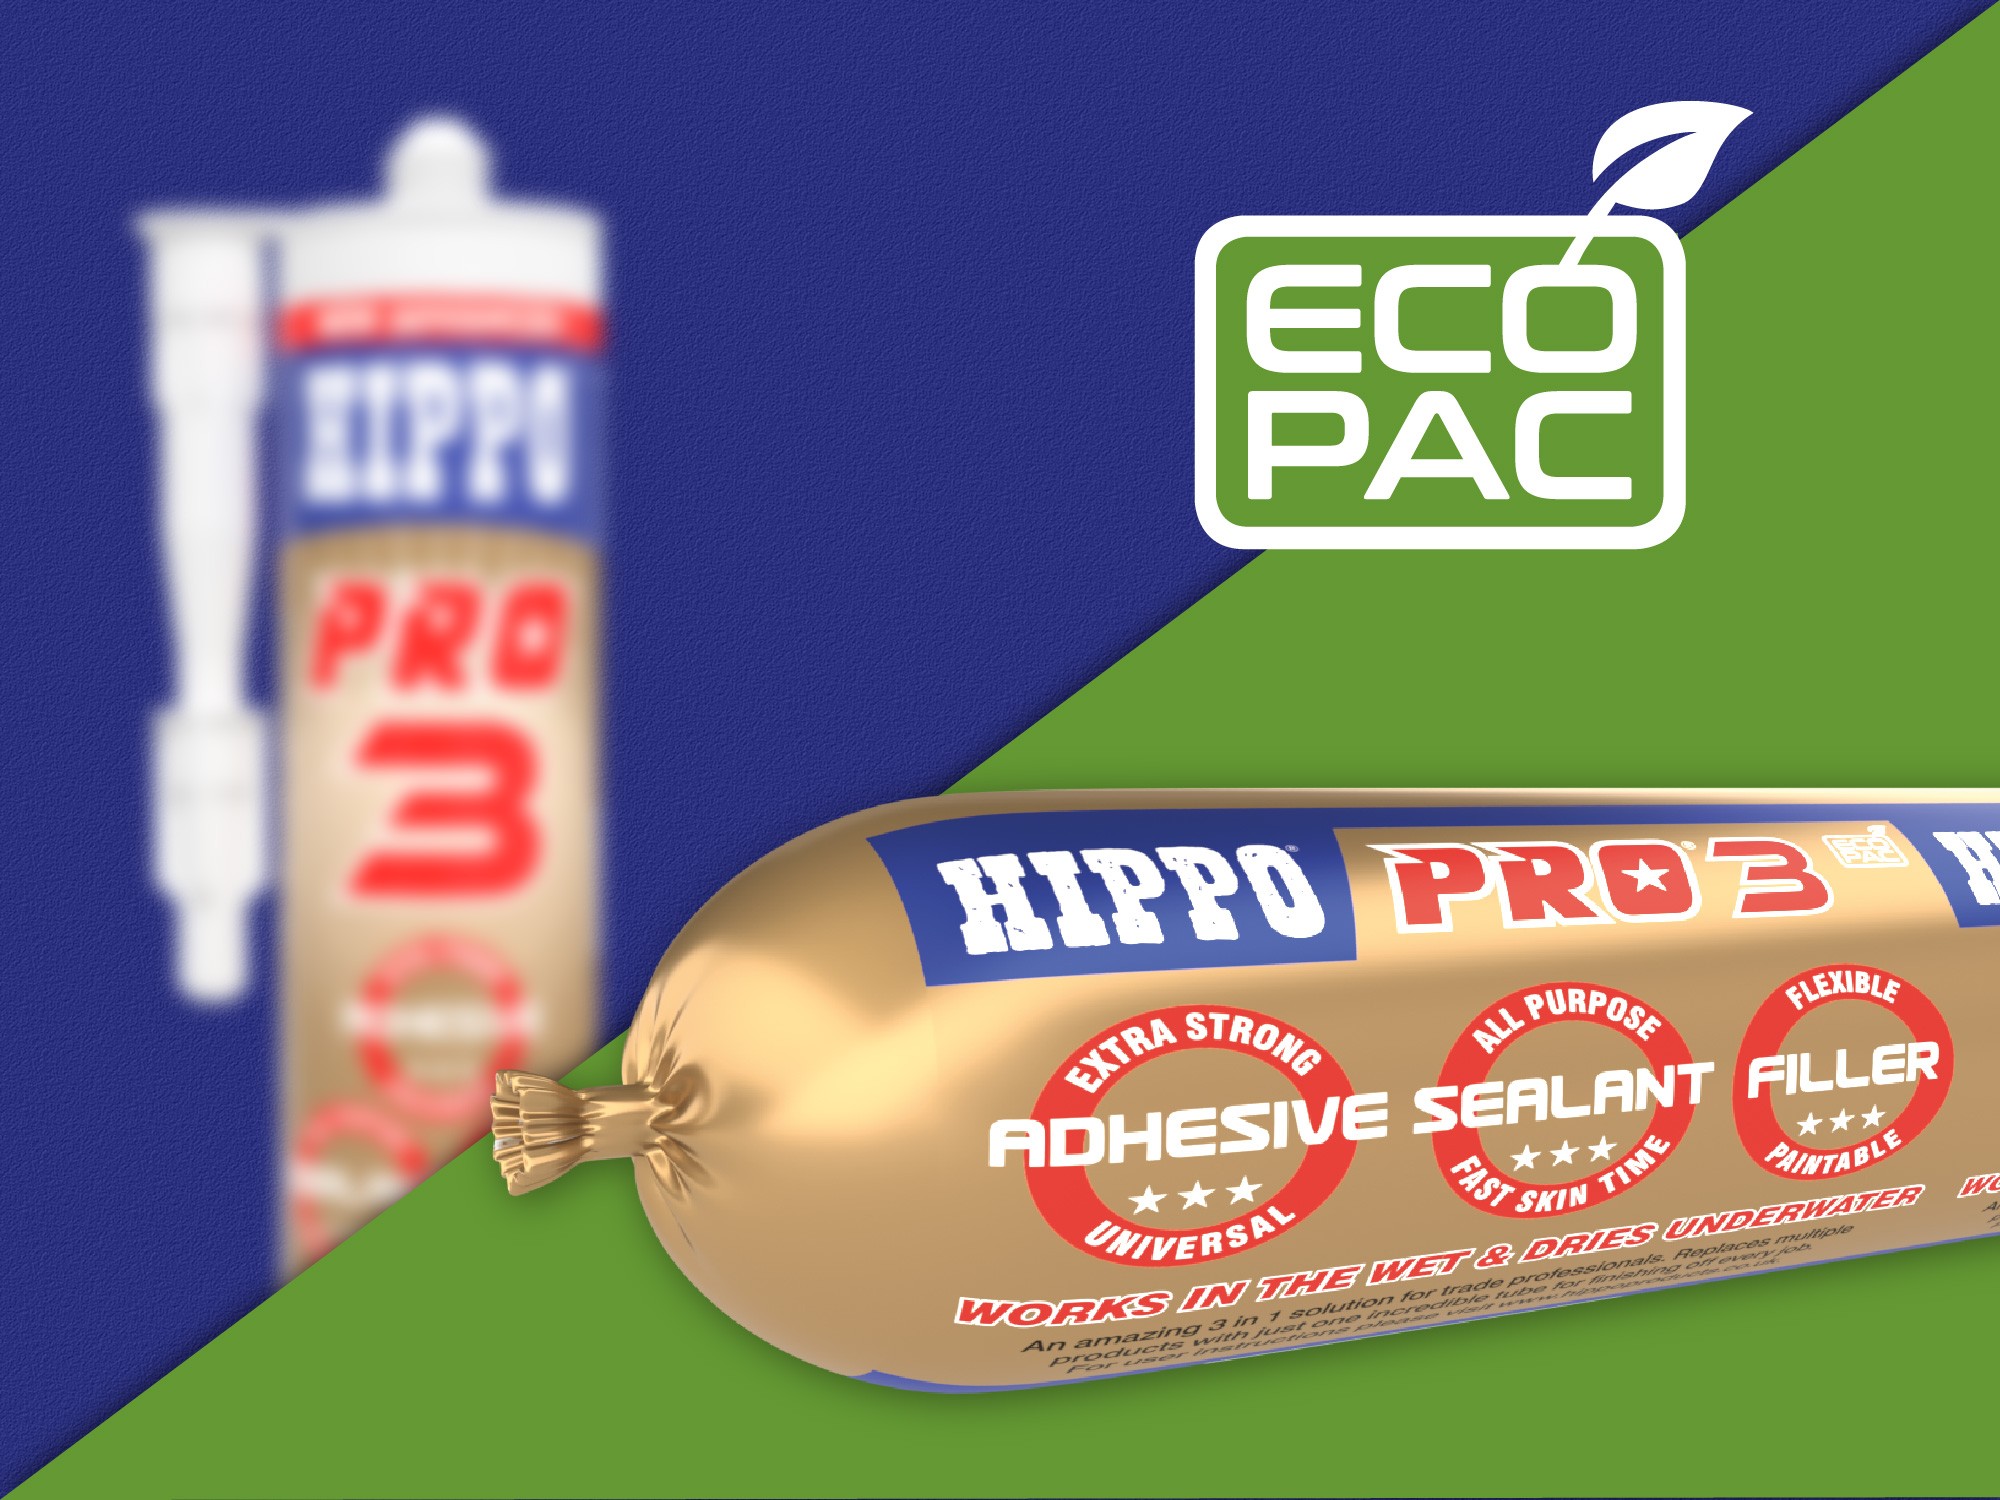 Hippo ECO-PAC Event Announced for Newhaven Branch